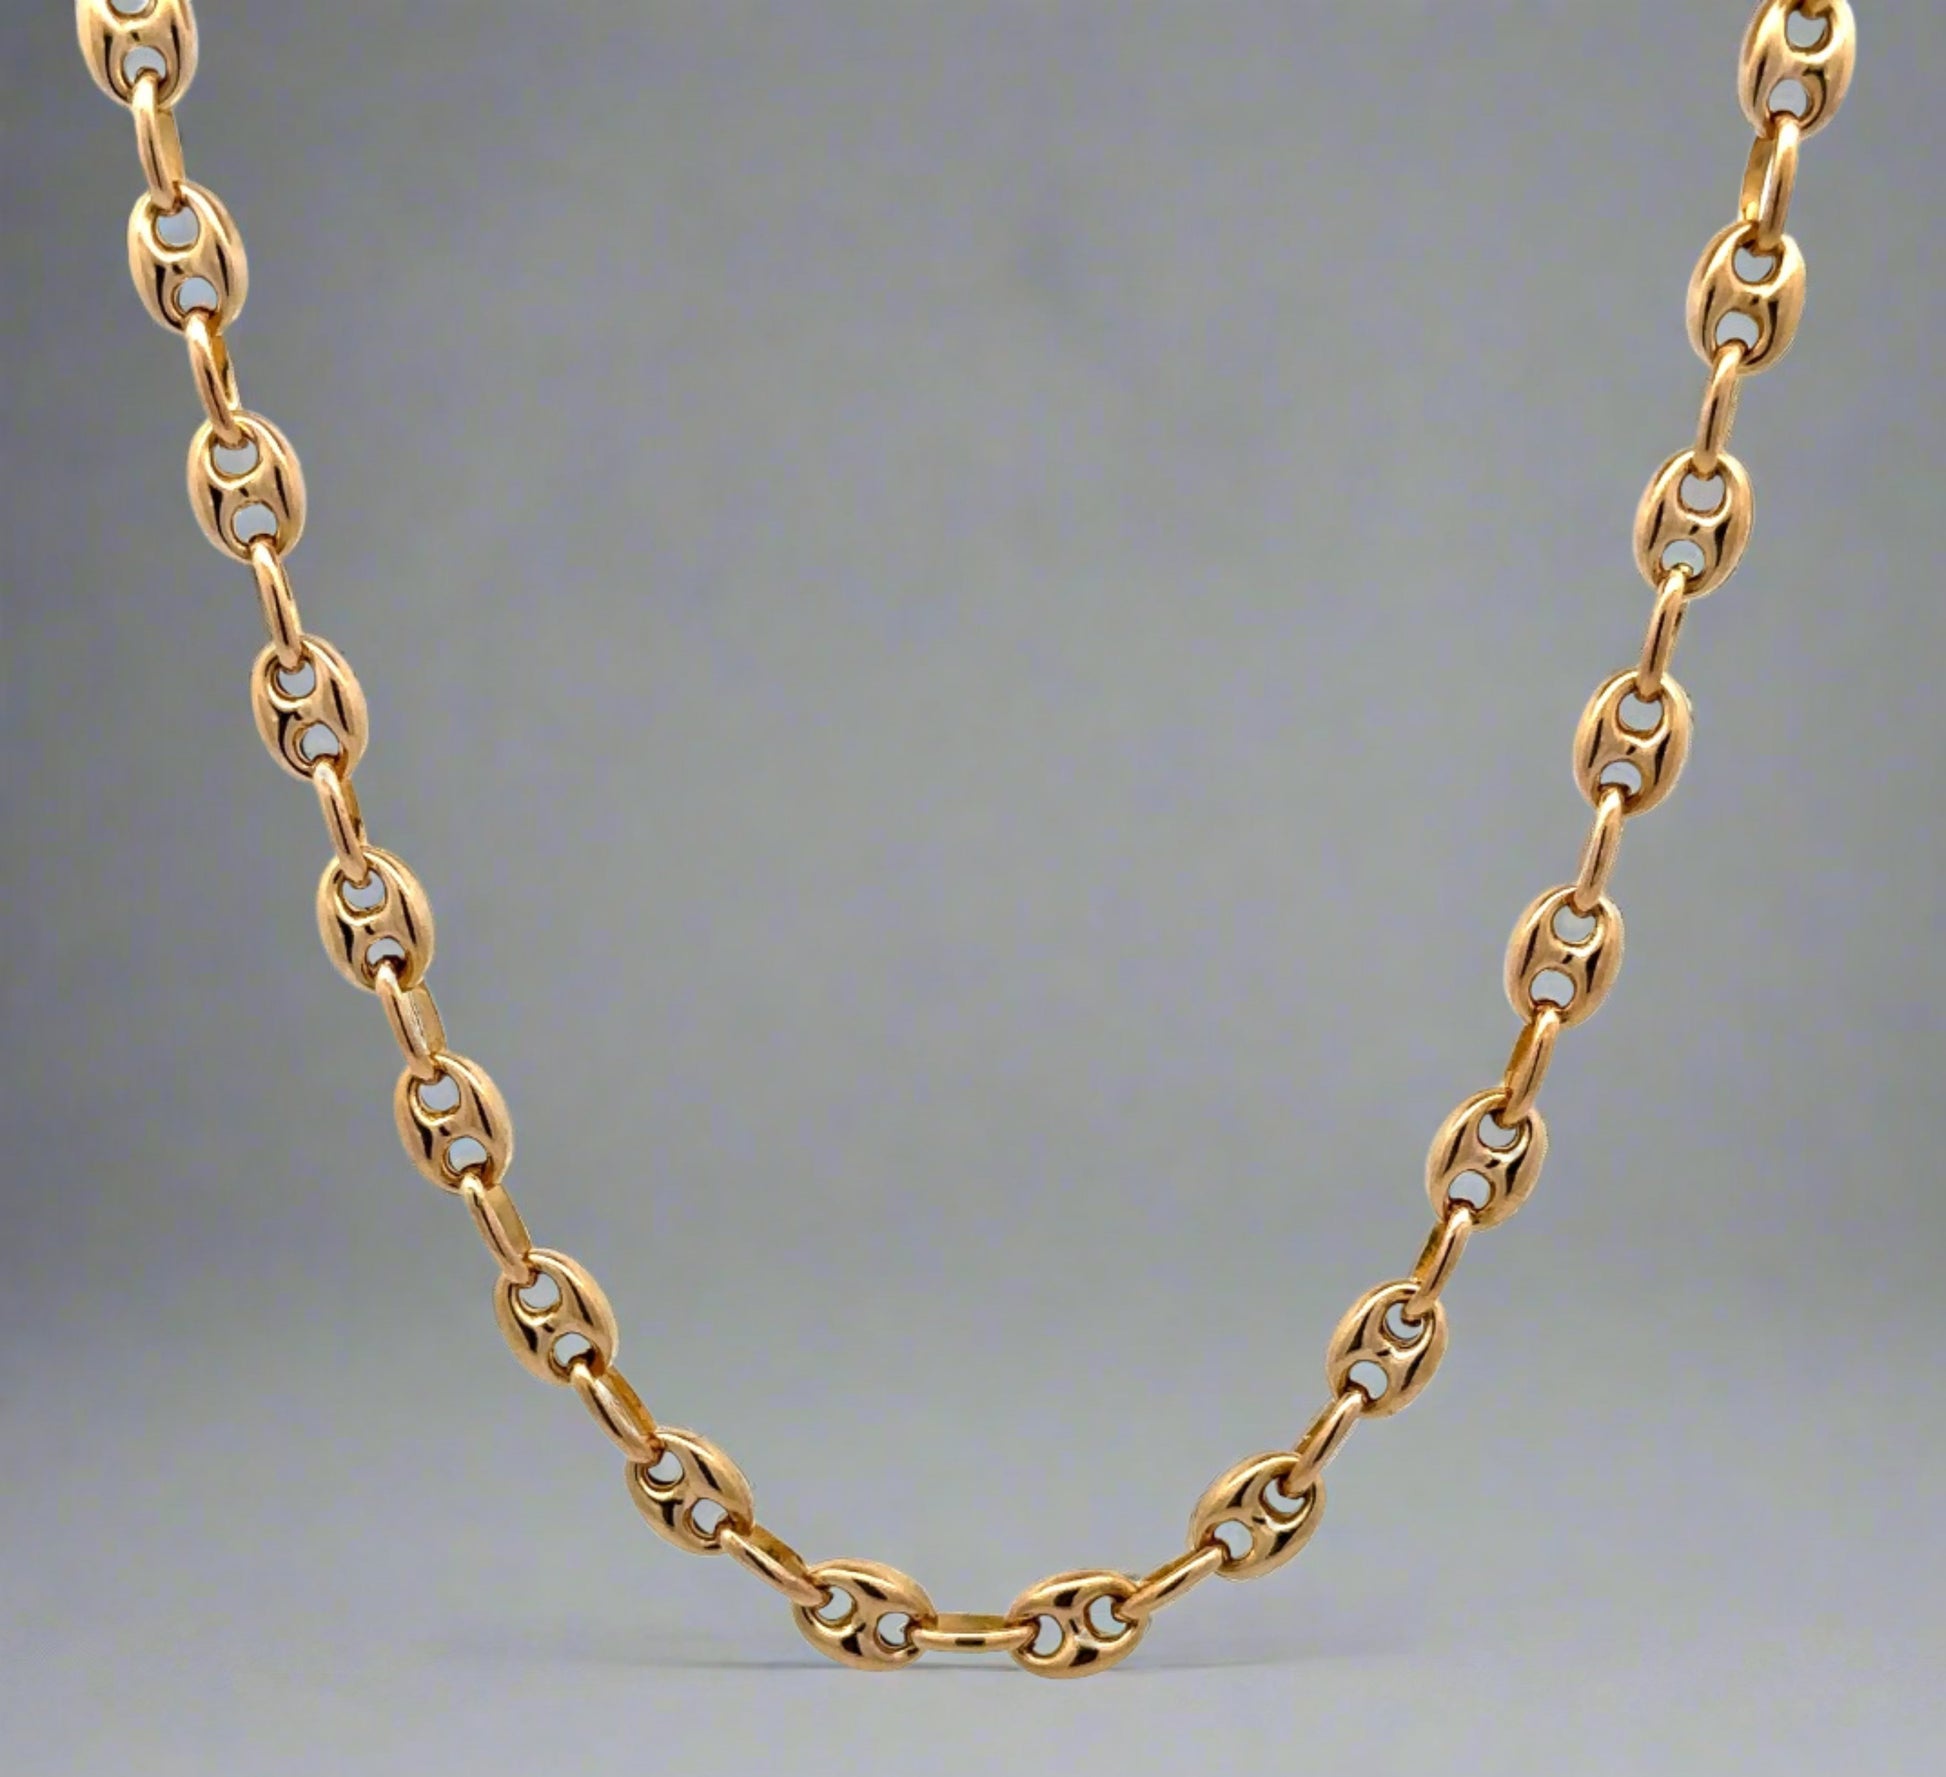 360 video of yellow gold gucci link chain